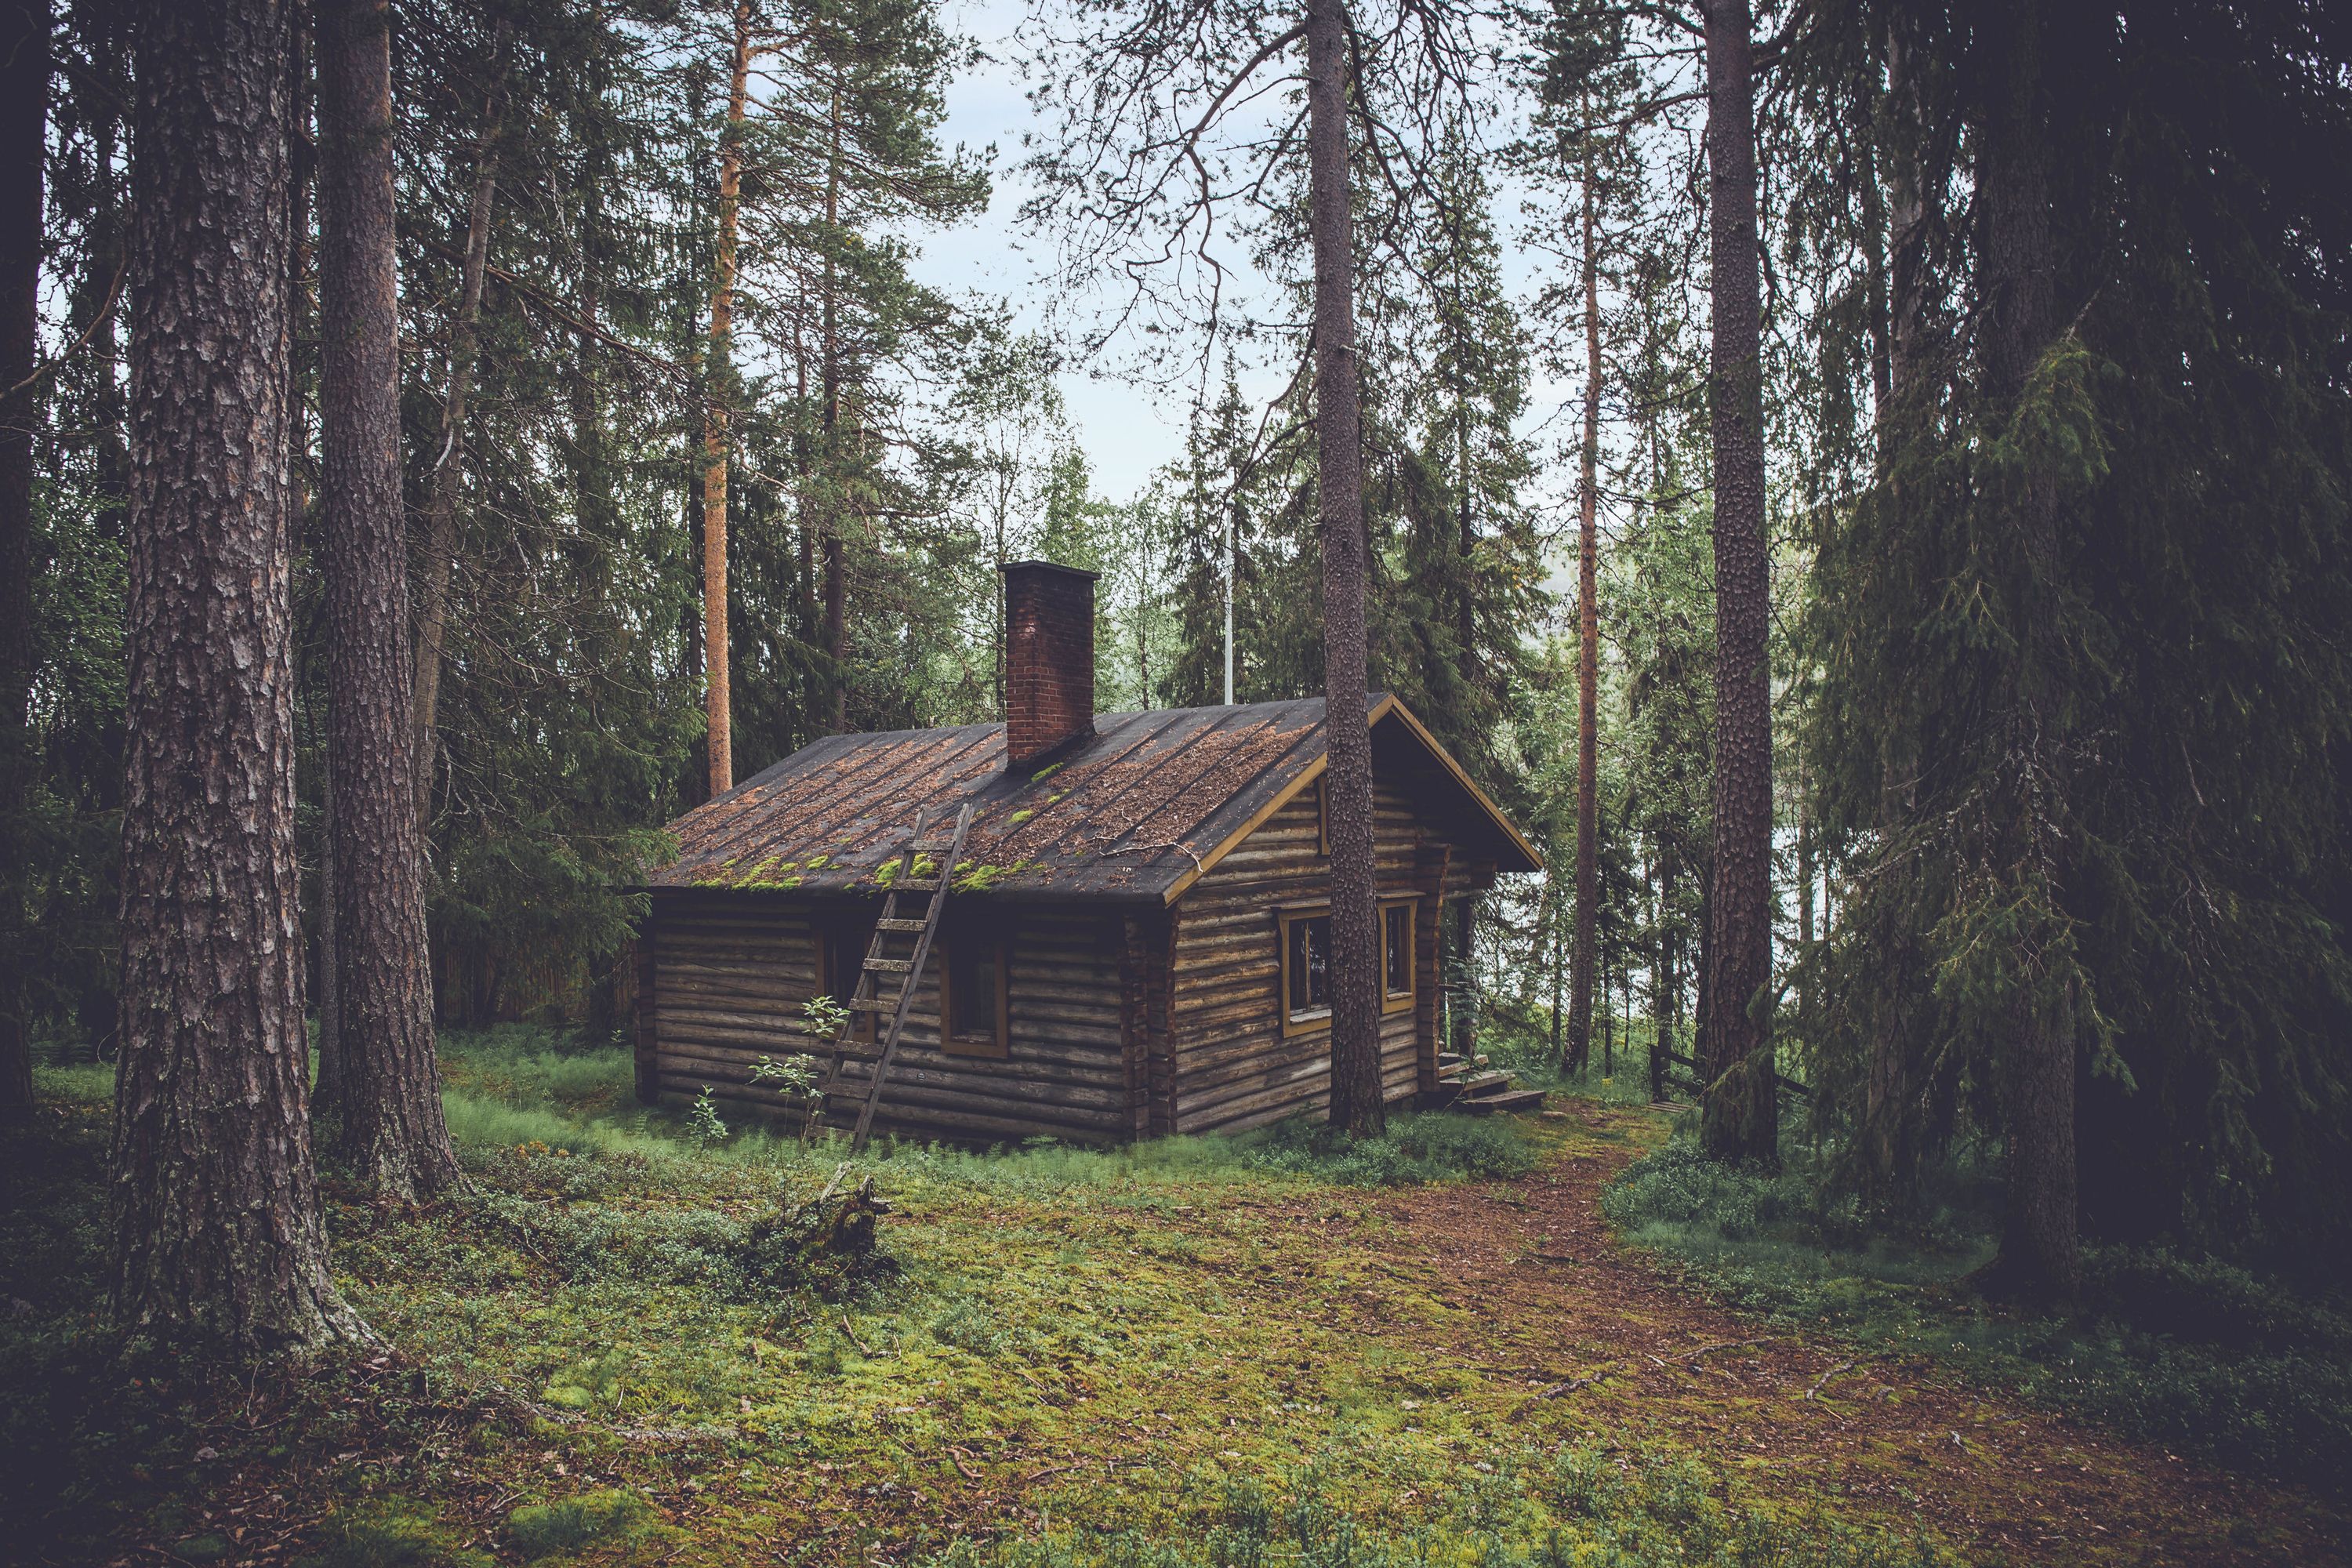 Cabin Picture. Download Free Image